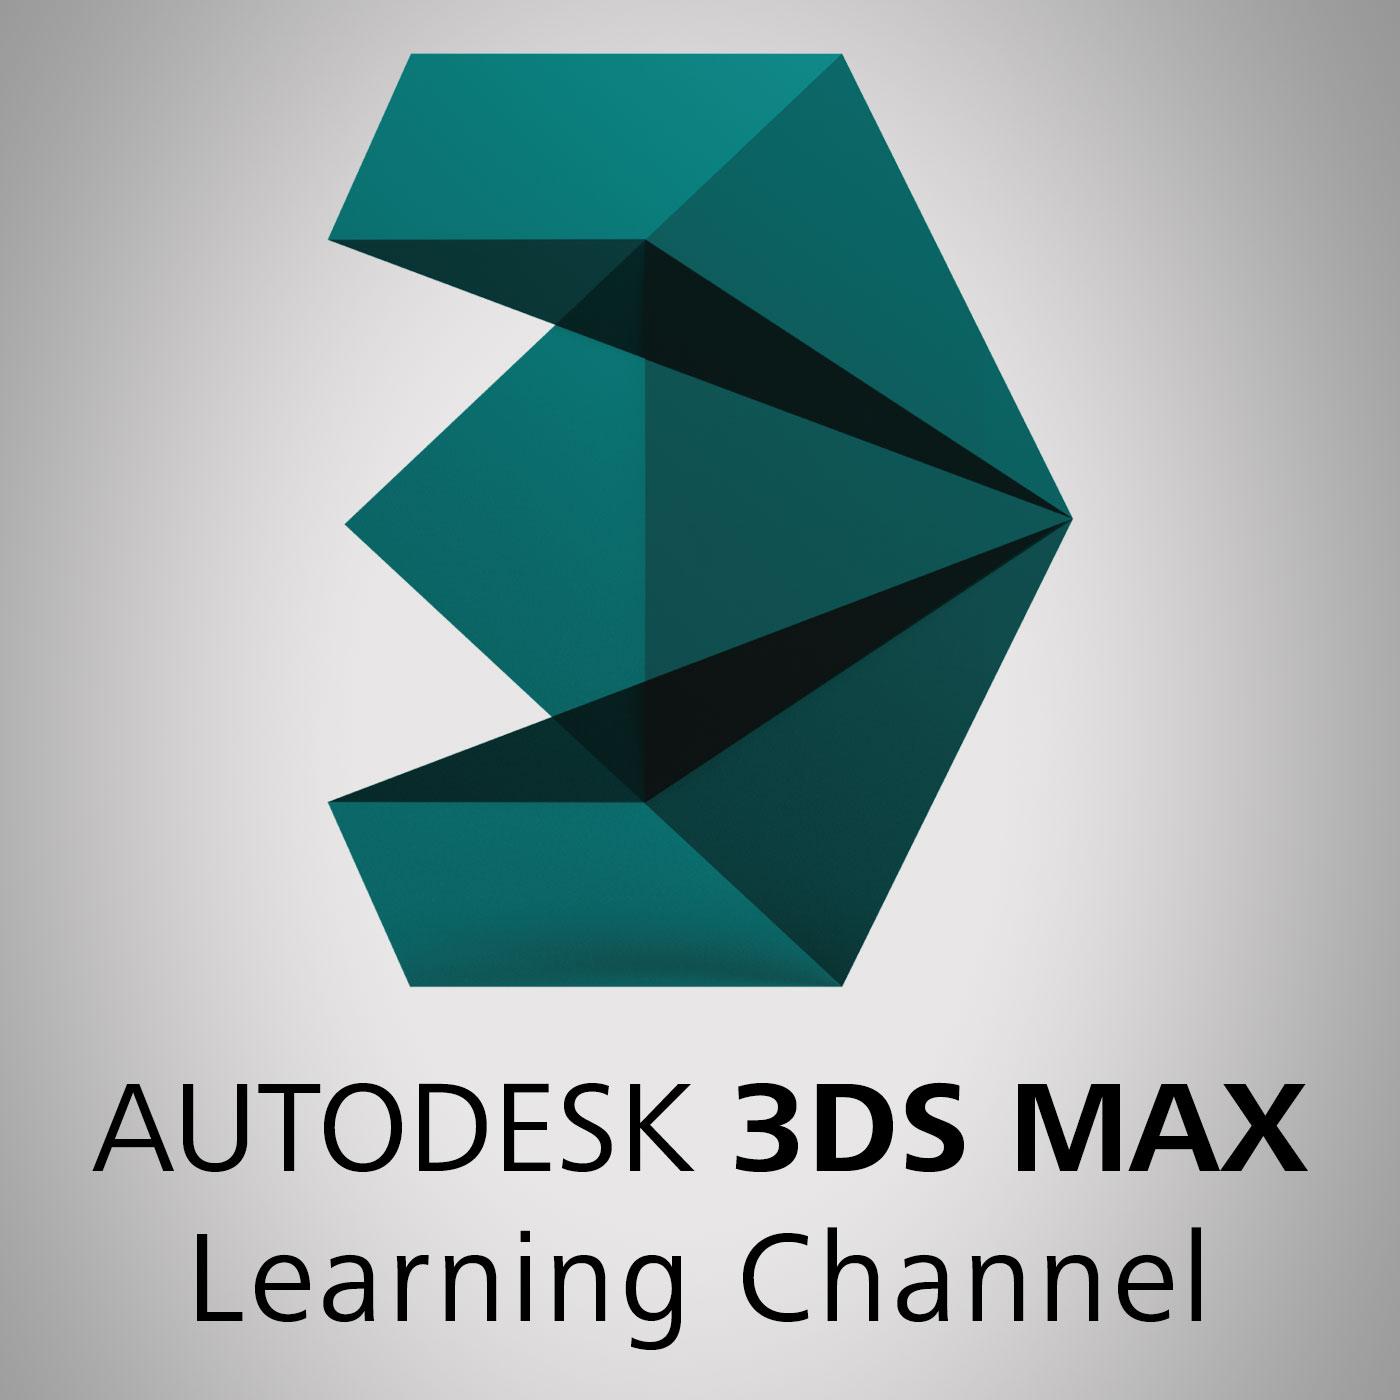 Autodesk 3ds Max now has support for ACES and OpenColorIO - ACESCentral